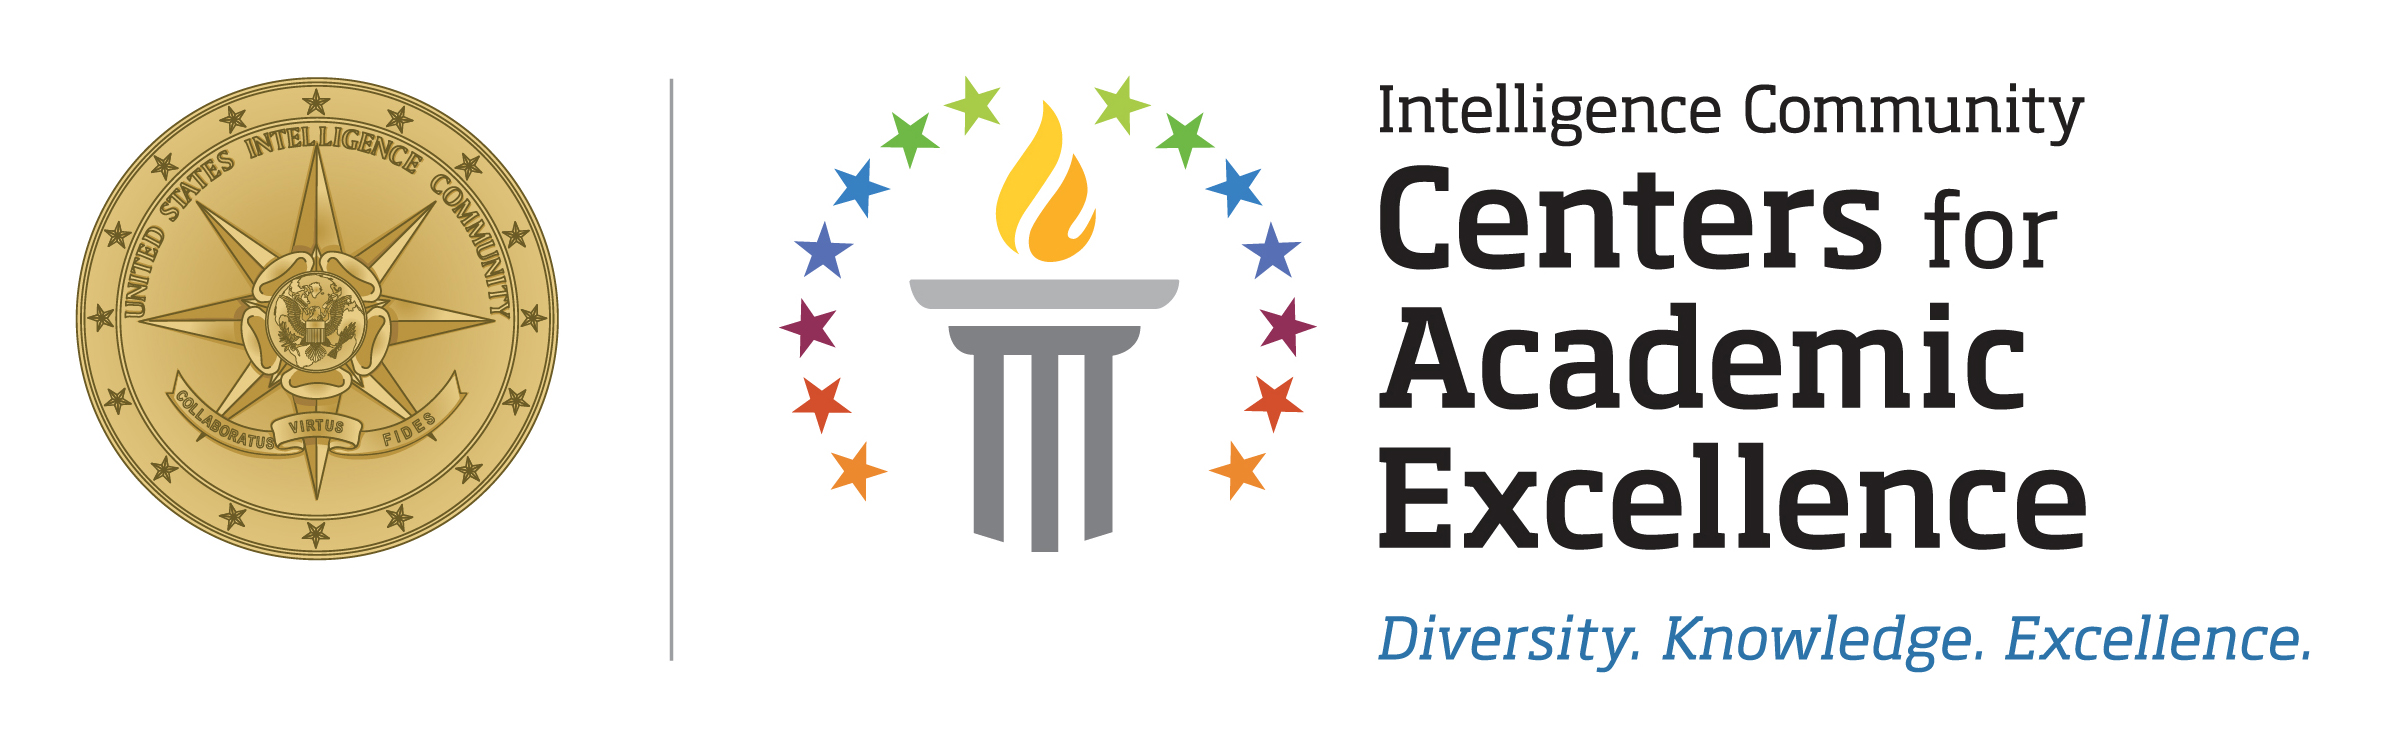 Intelligence Community Centers for Academic Excellence